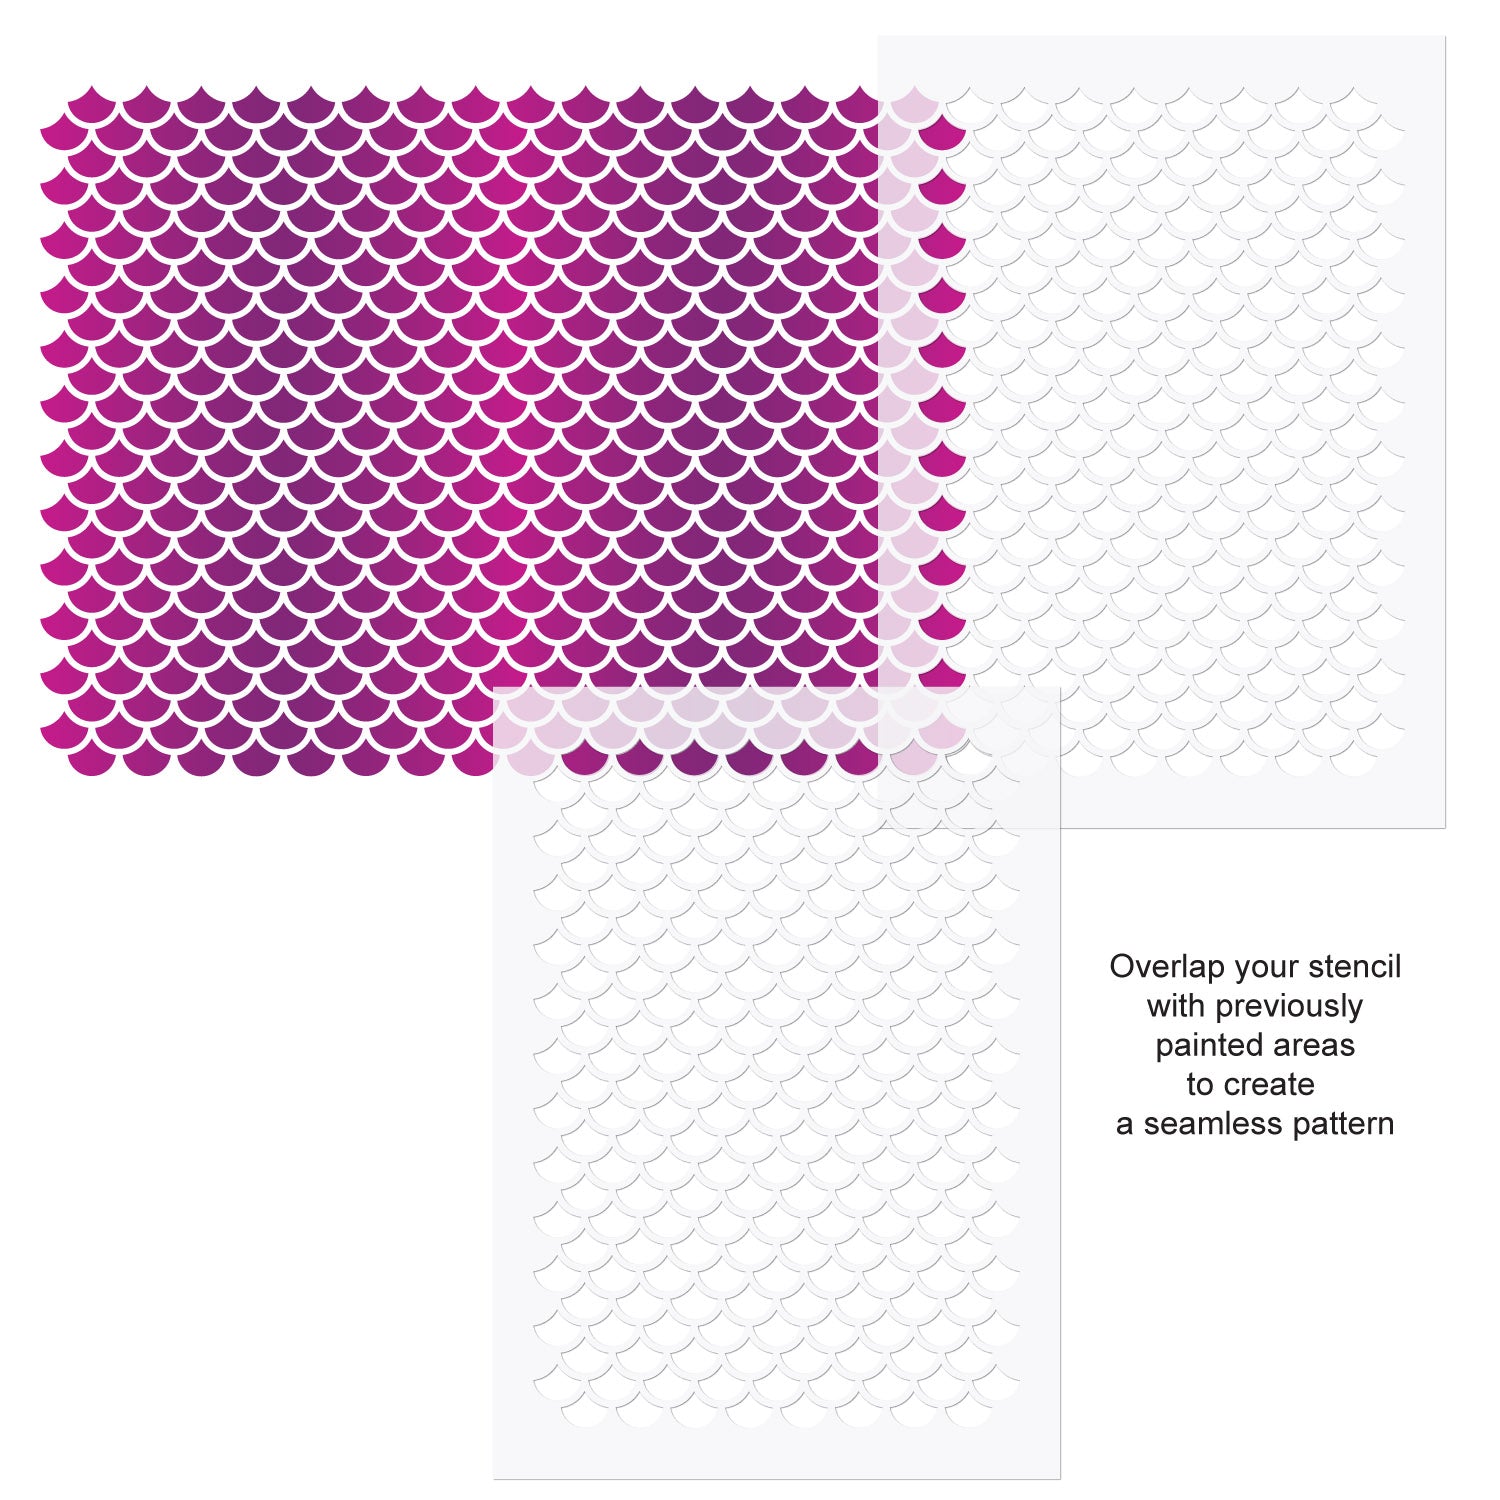 CraftStar Mermaid Scales Wall Stencil Use Guide